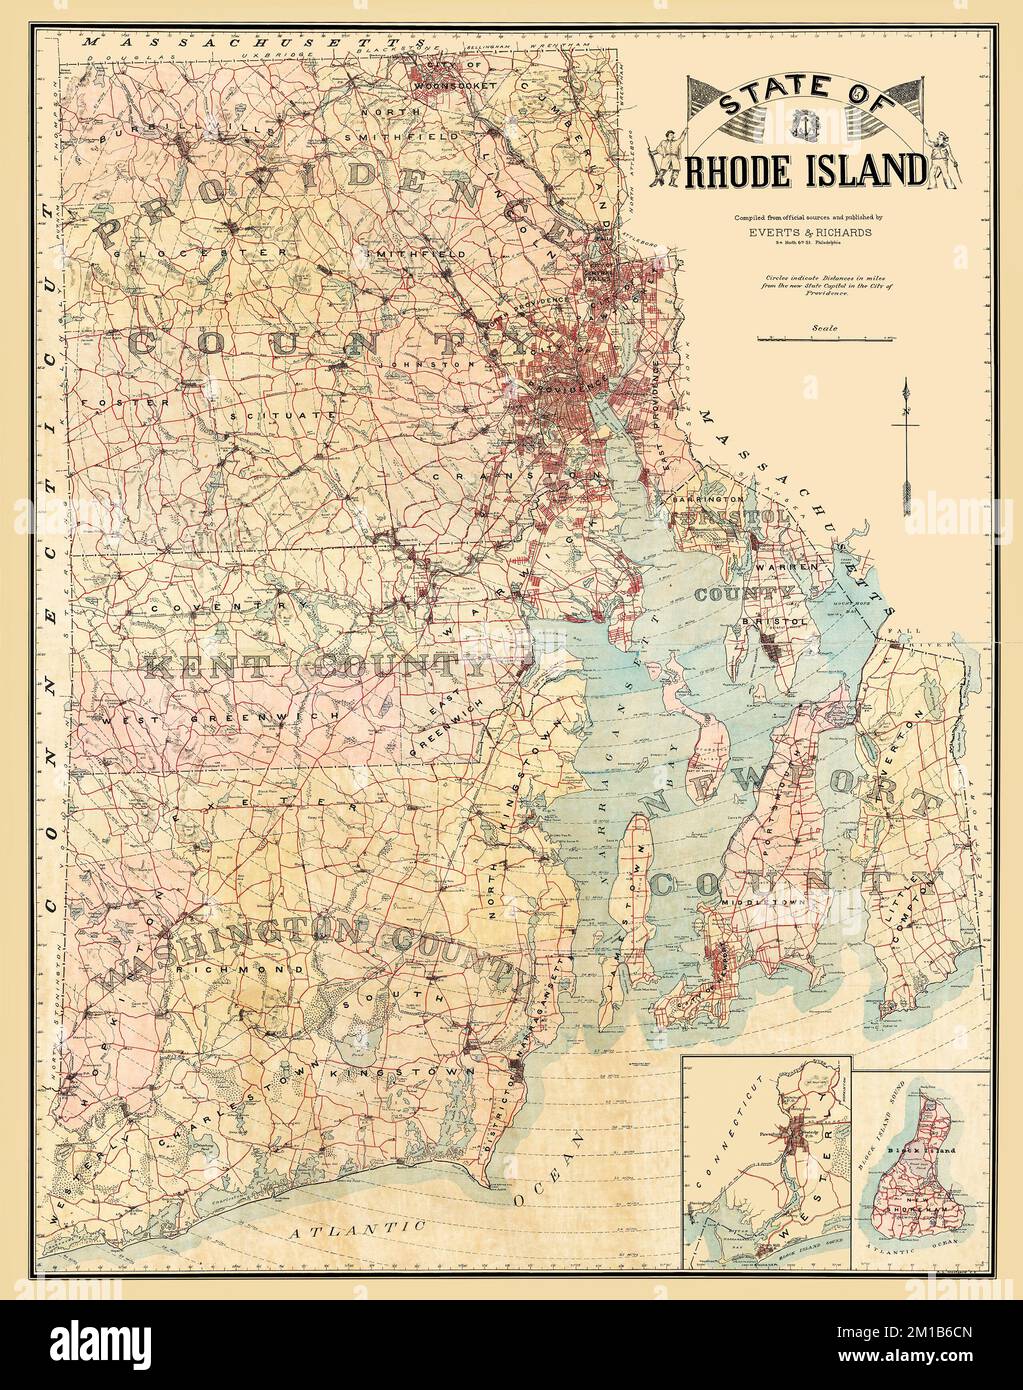 Rhode Island Antique Map 1890 features counties. Published 1890. This is a beautifully detailed historic, enhanced, restored reproduction. Shows counties, cities, towns, and other points of interest. Stock Photo